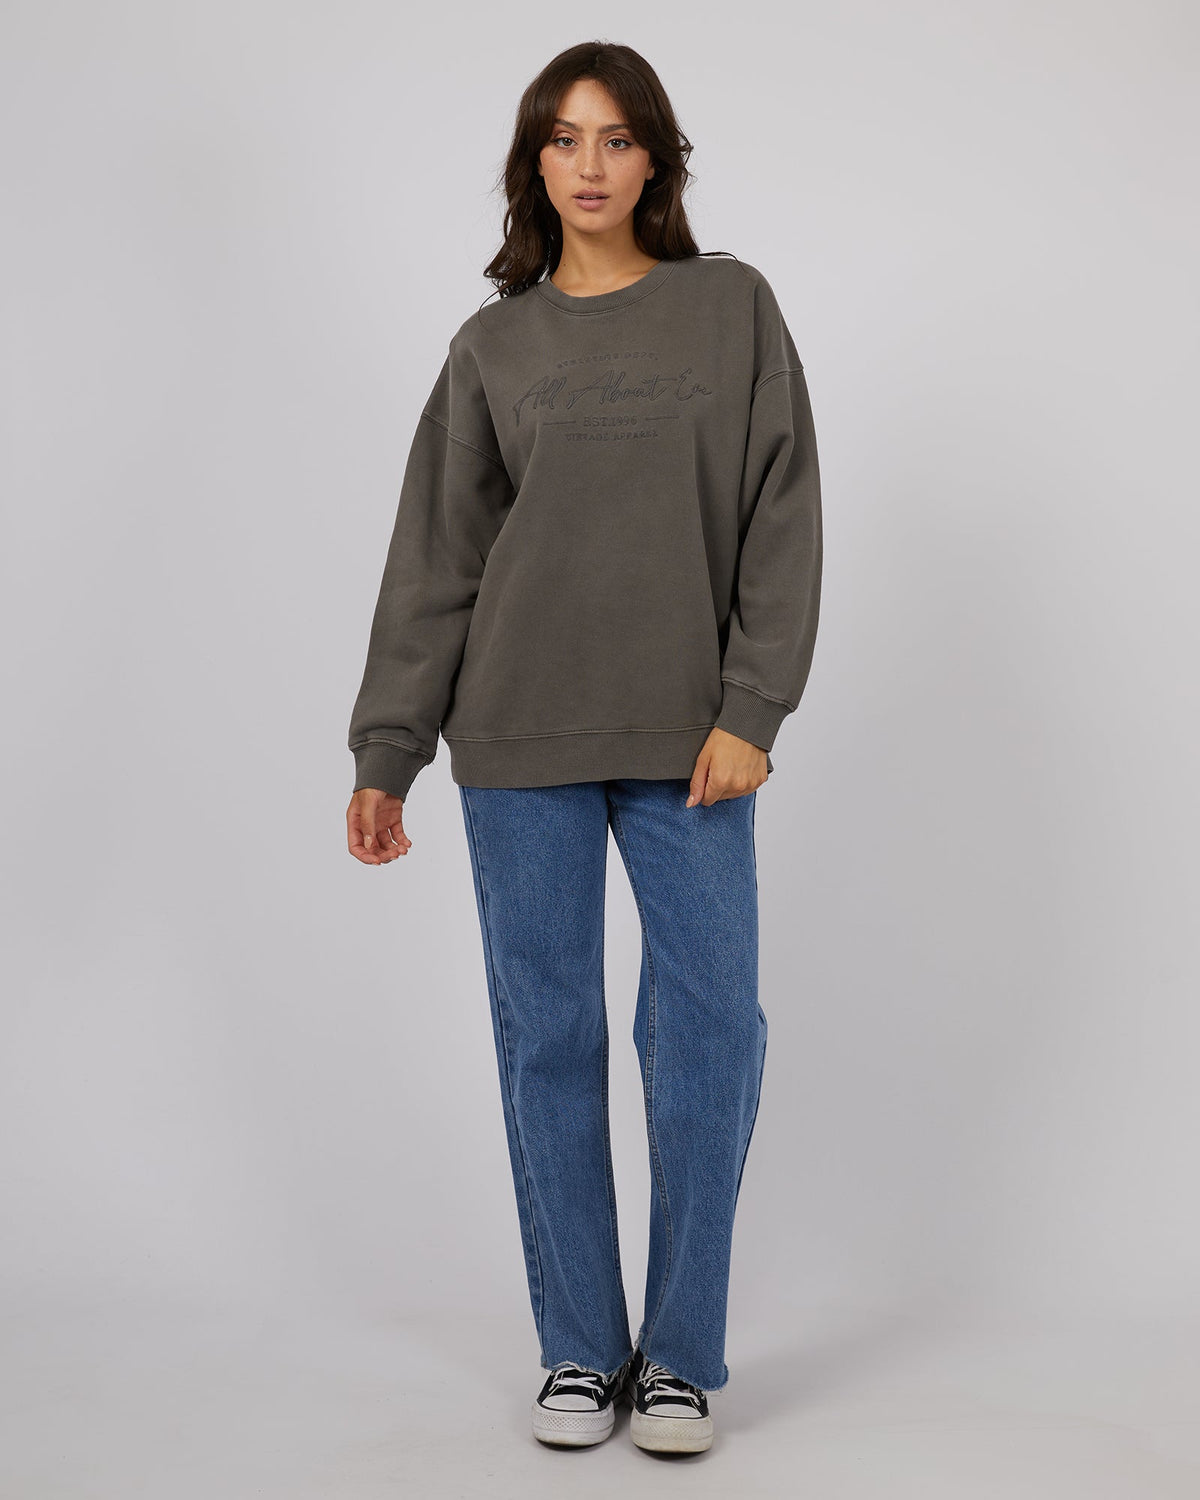 All About Eve-Classic Crew Charcoal-Edge Clothing